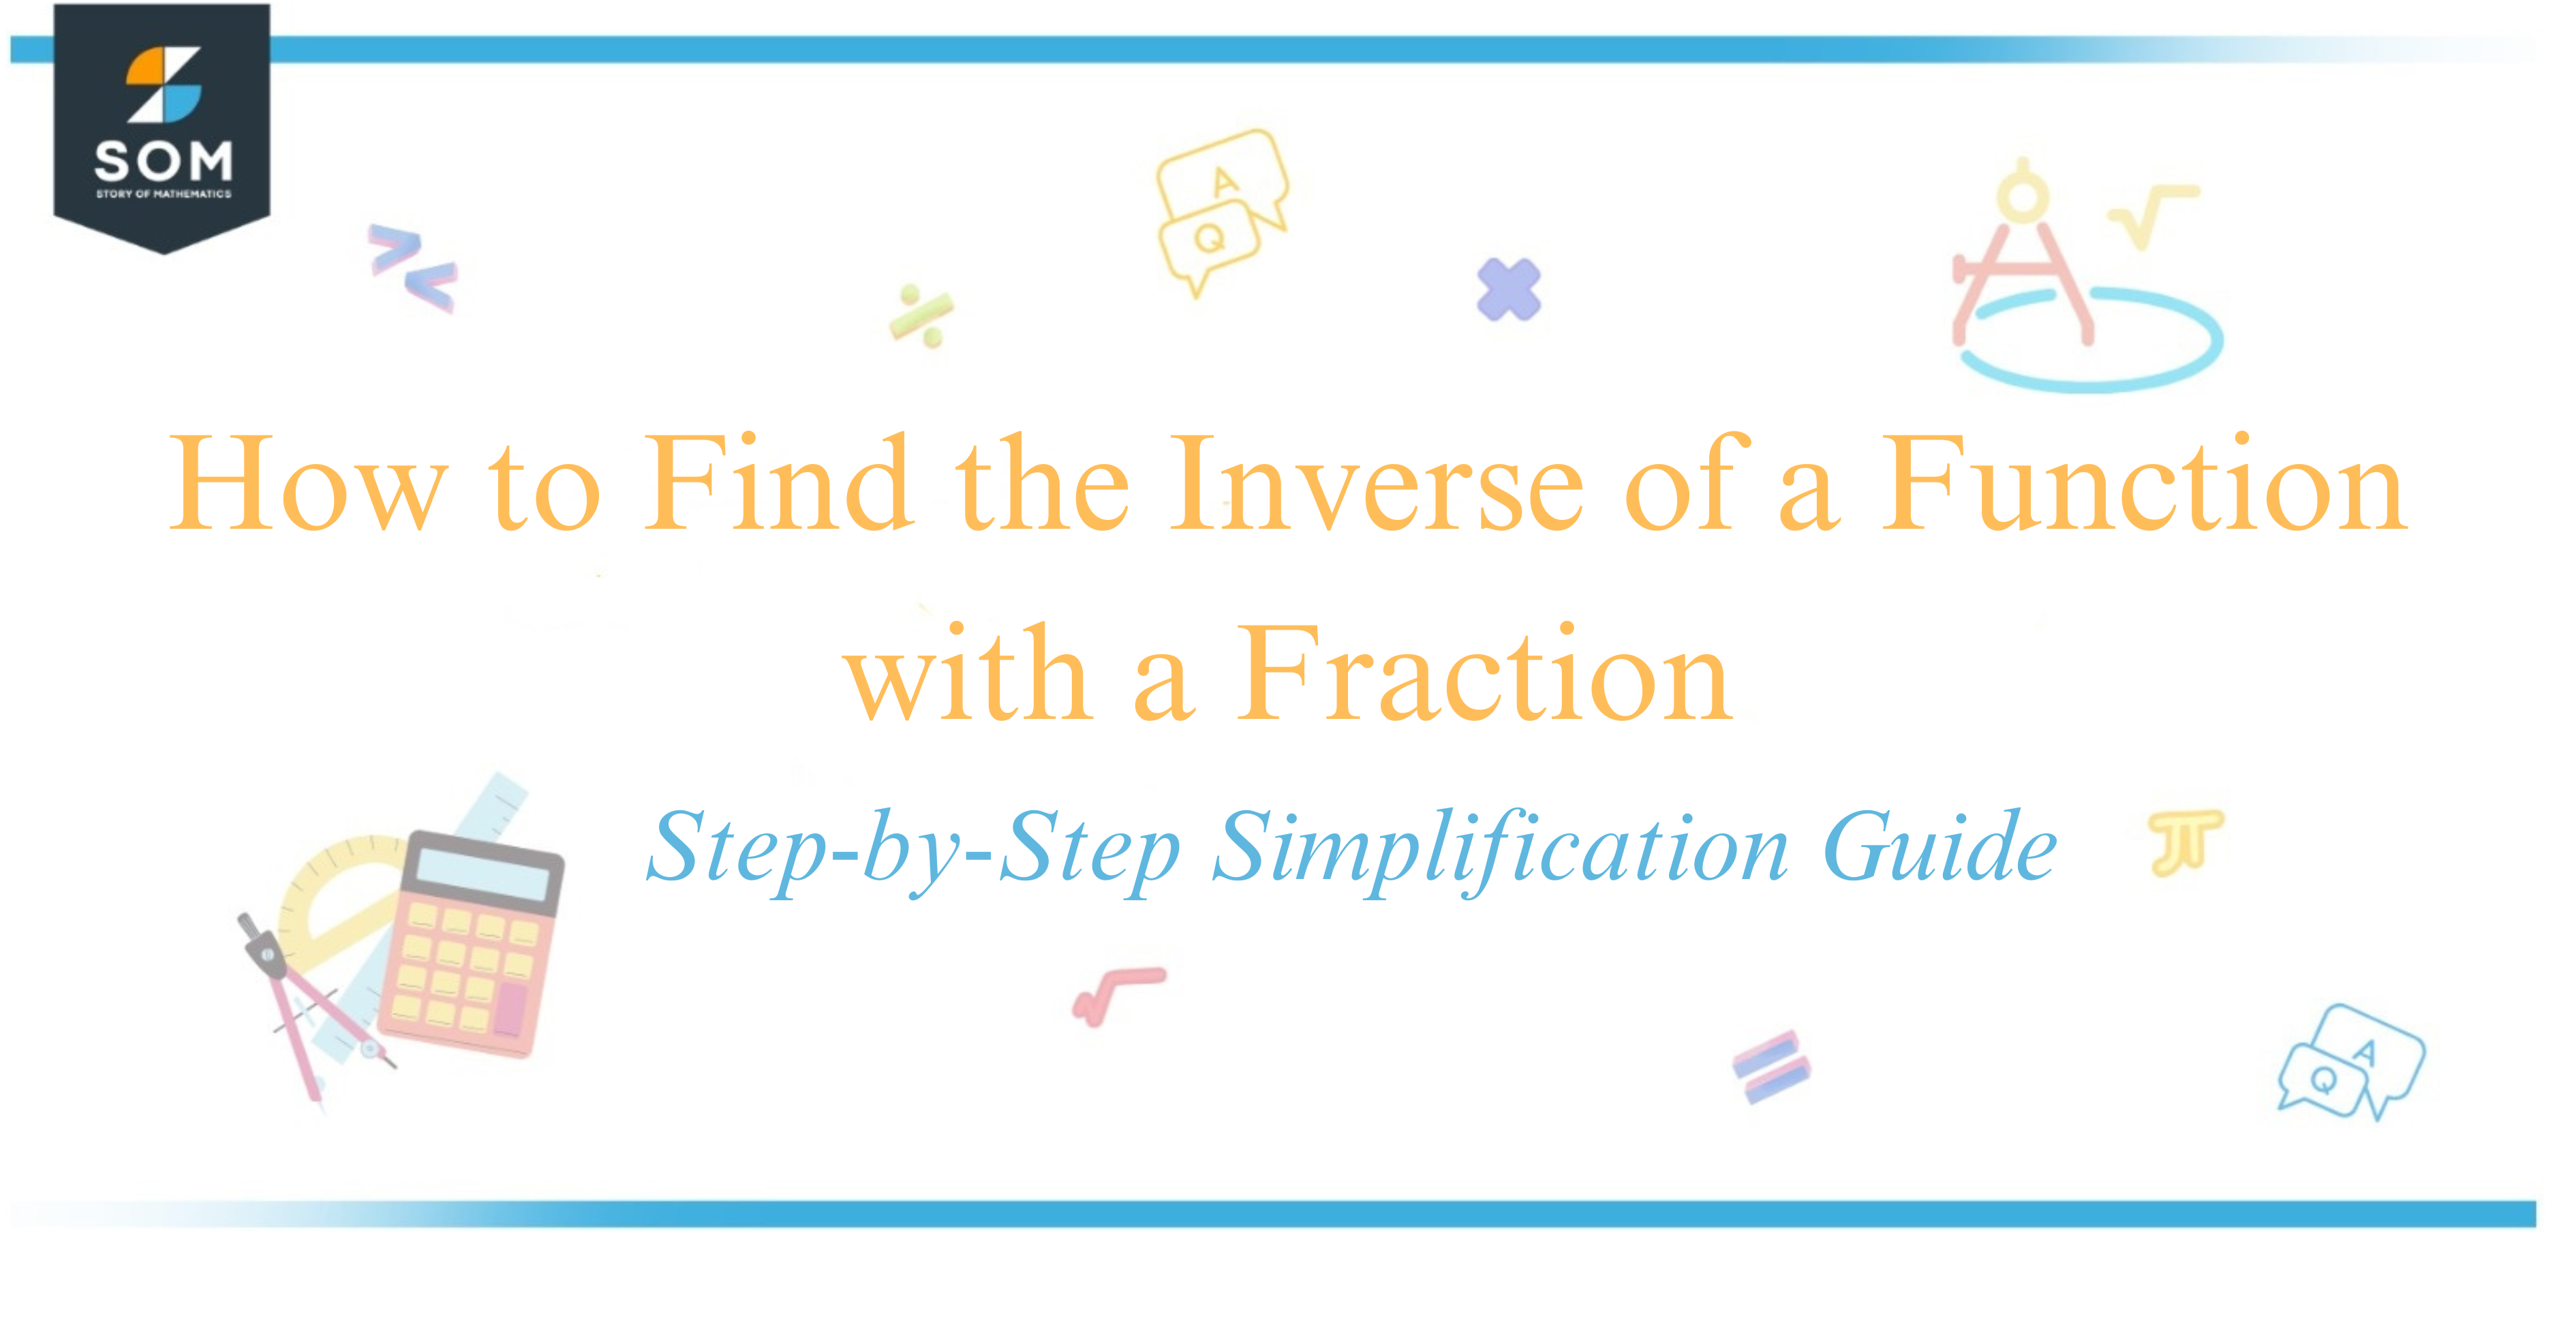 How to Find the Inverse of a Function with a Fraction Step-by-Step Simplification Guide